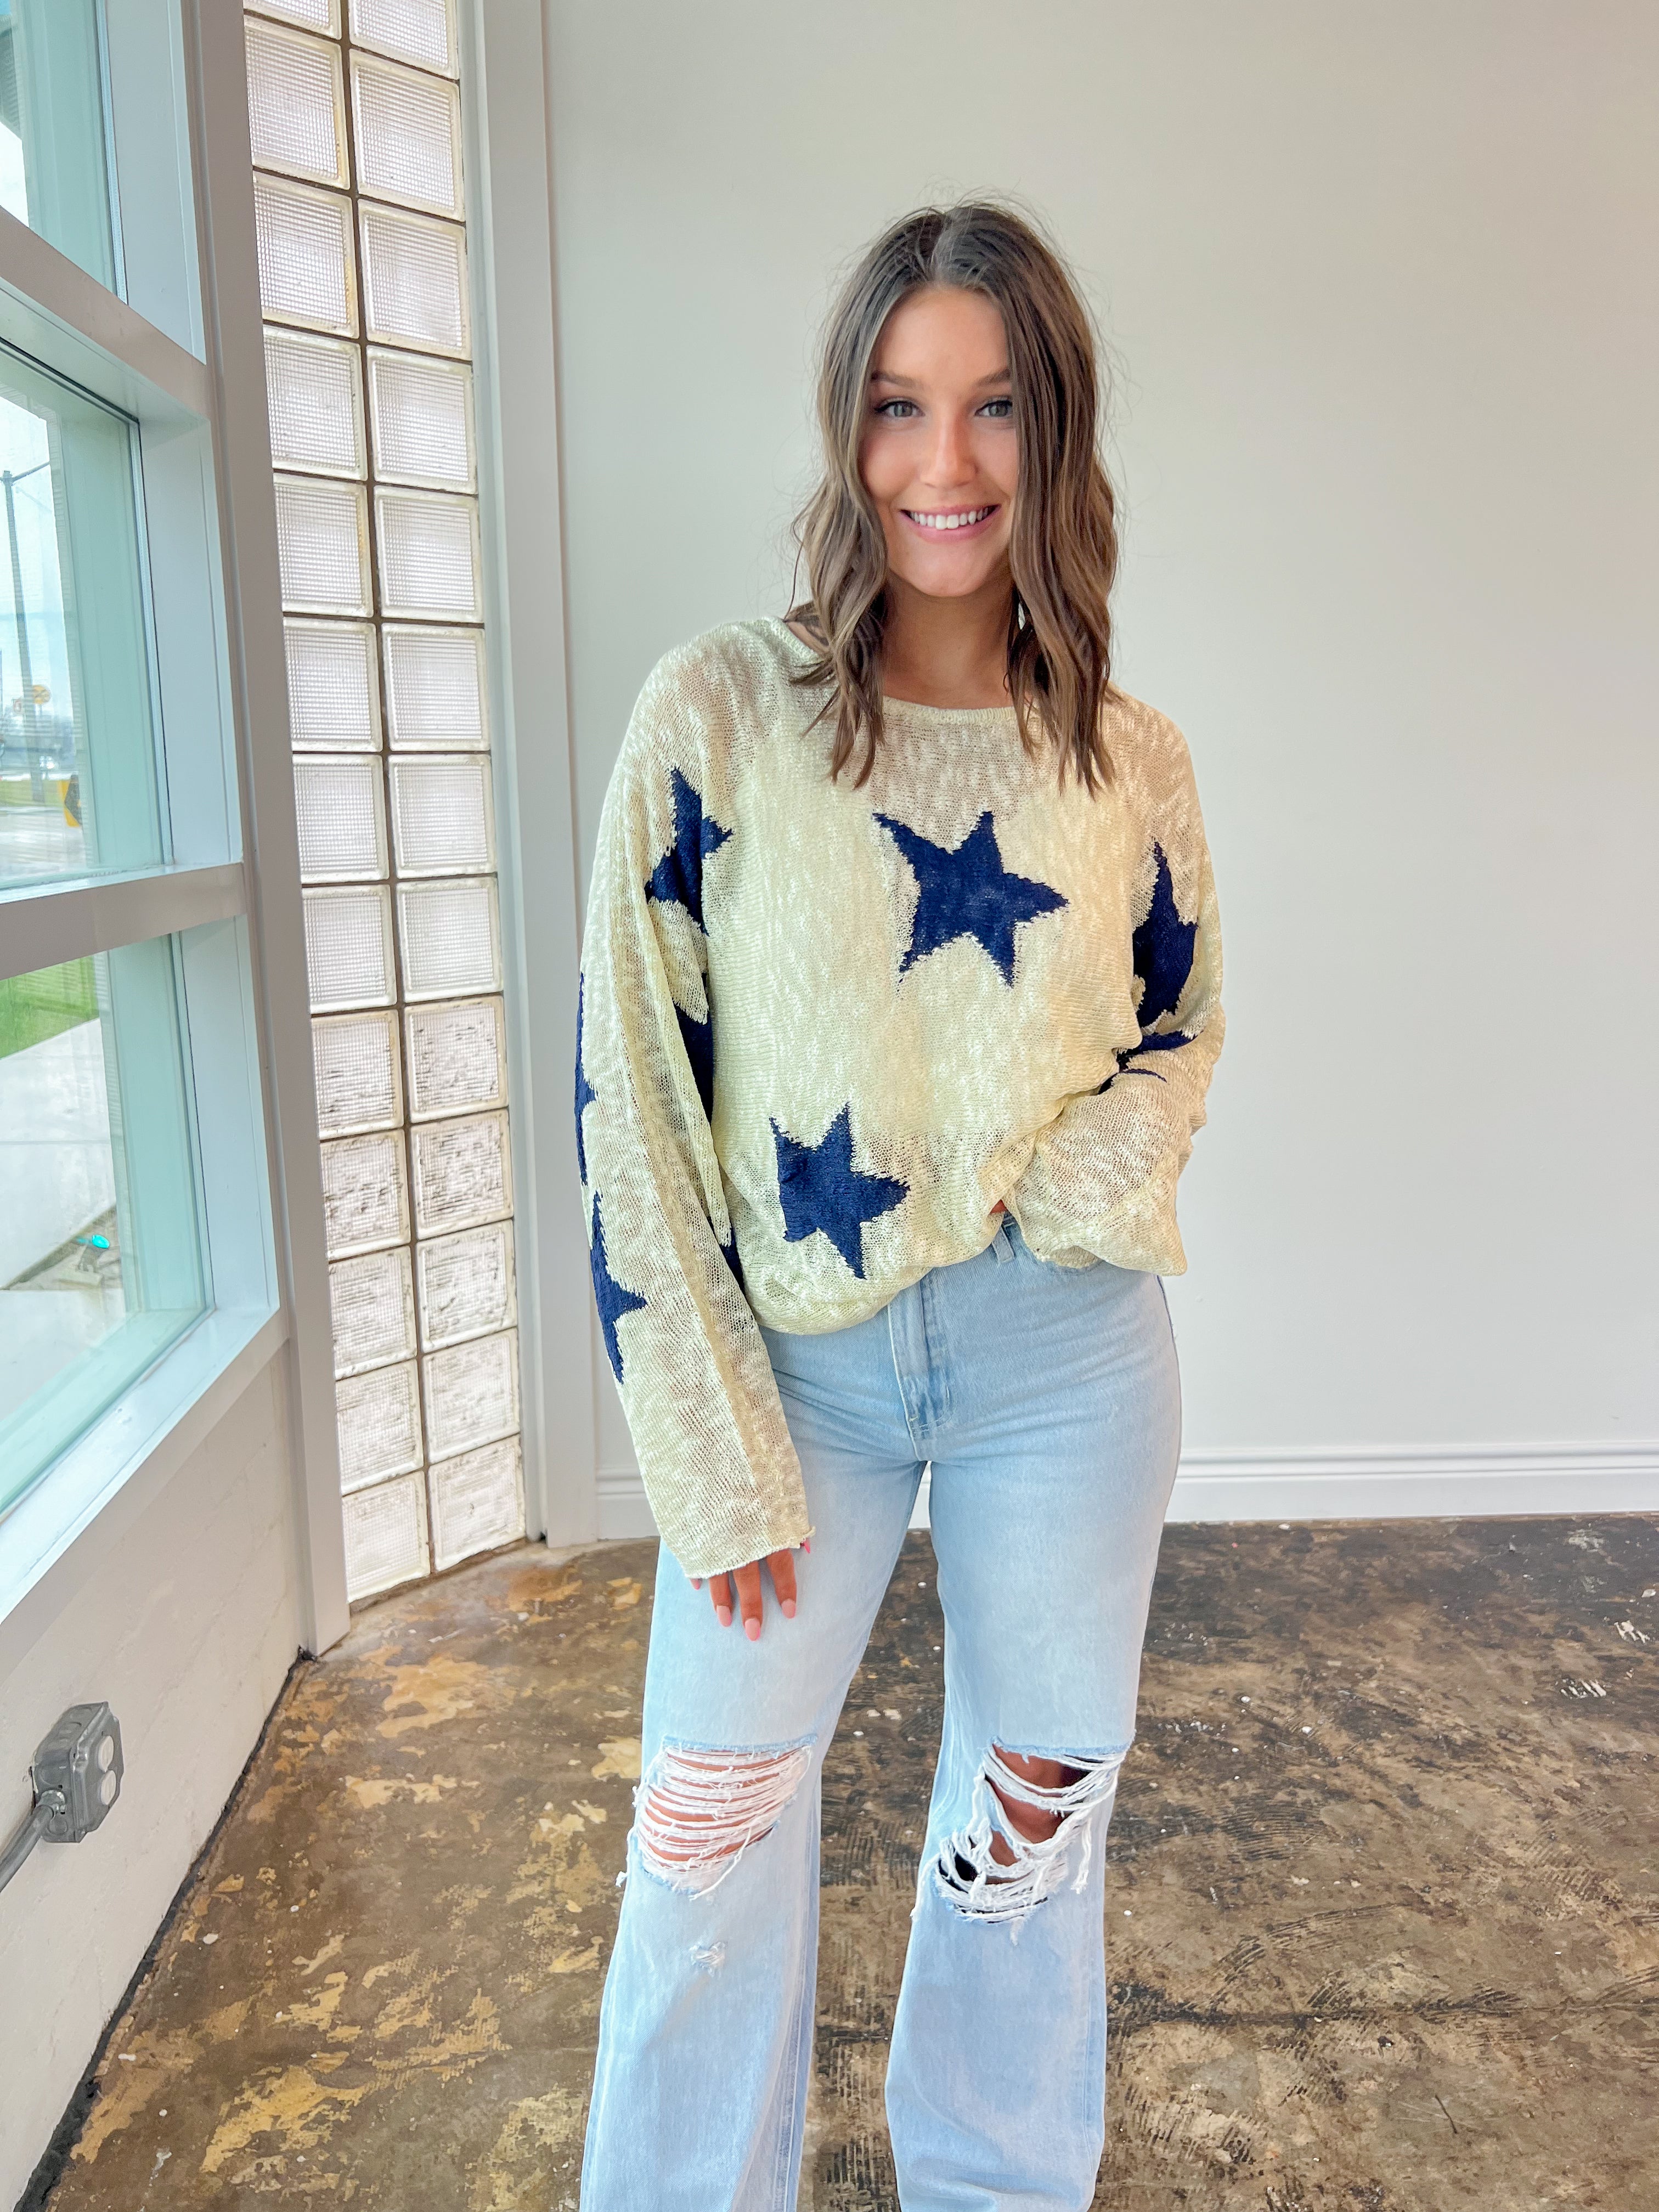 Star Spangled Sweater - JD Ranch Boutique